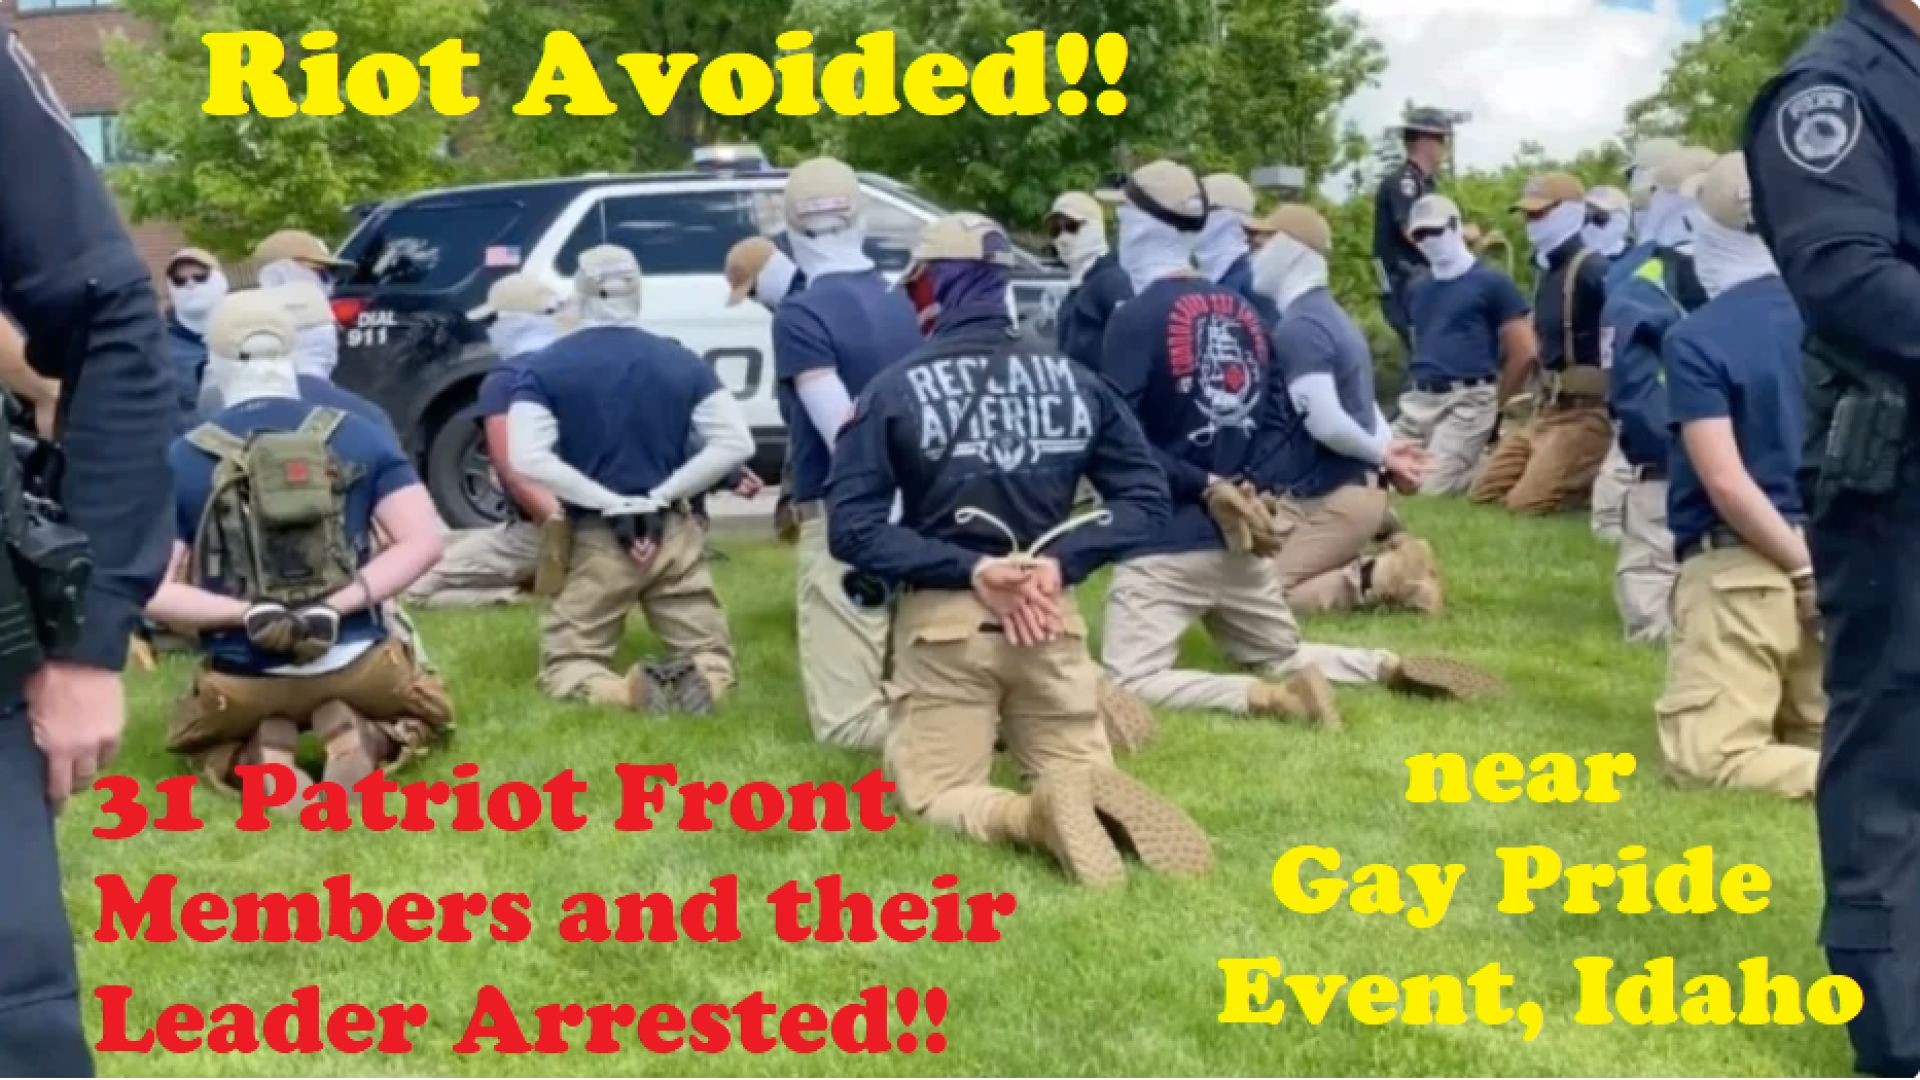 31 Patriot Front Members and their Leader Arrested near Idaho Pride Event!!